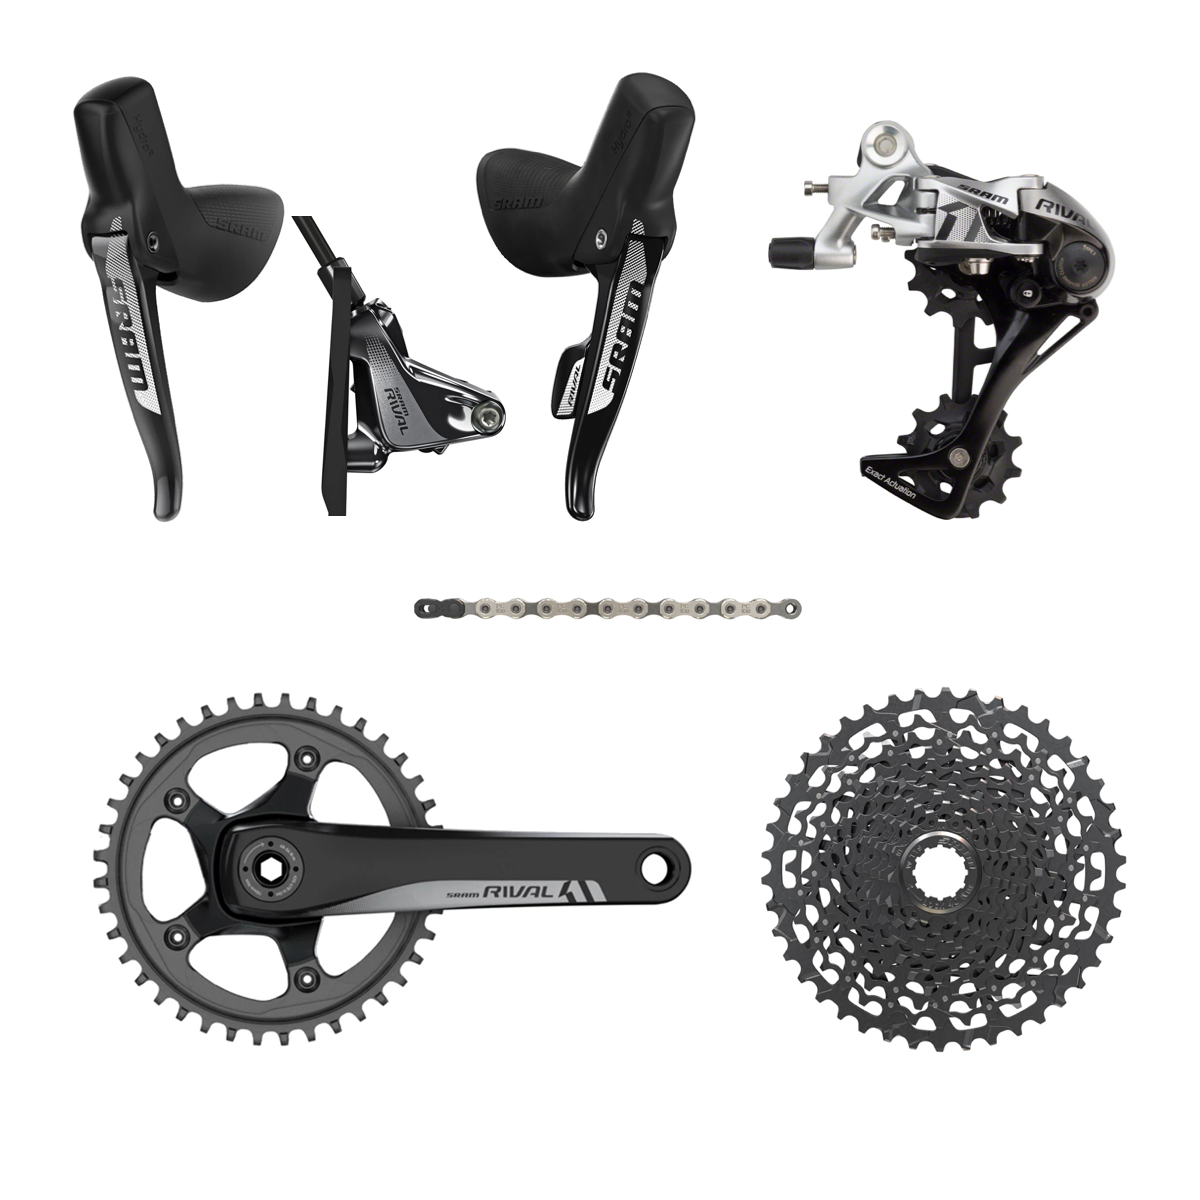 NEW SRAM Rival HRD 1x11 Speed Groupset, 175mm, 42t, 11-42t, GXP